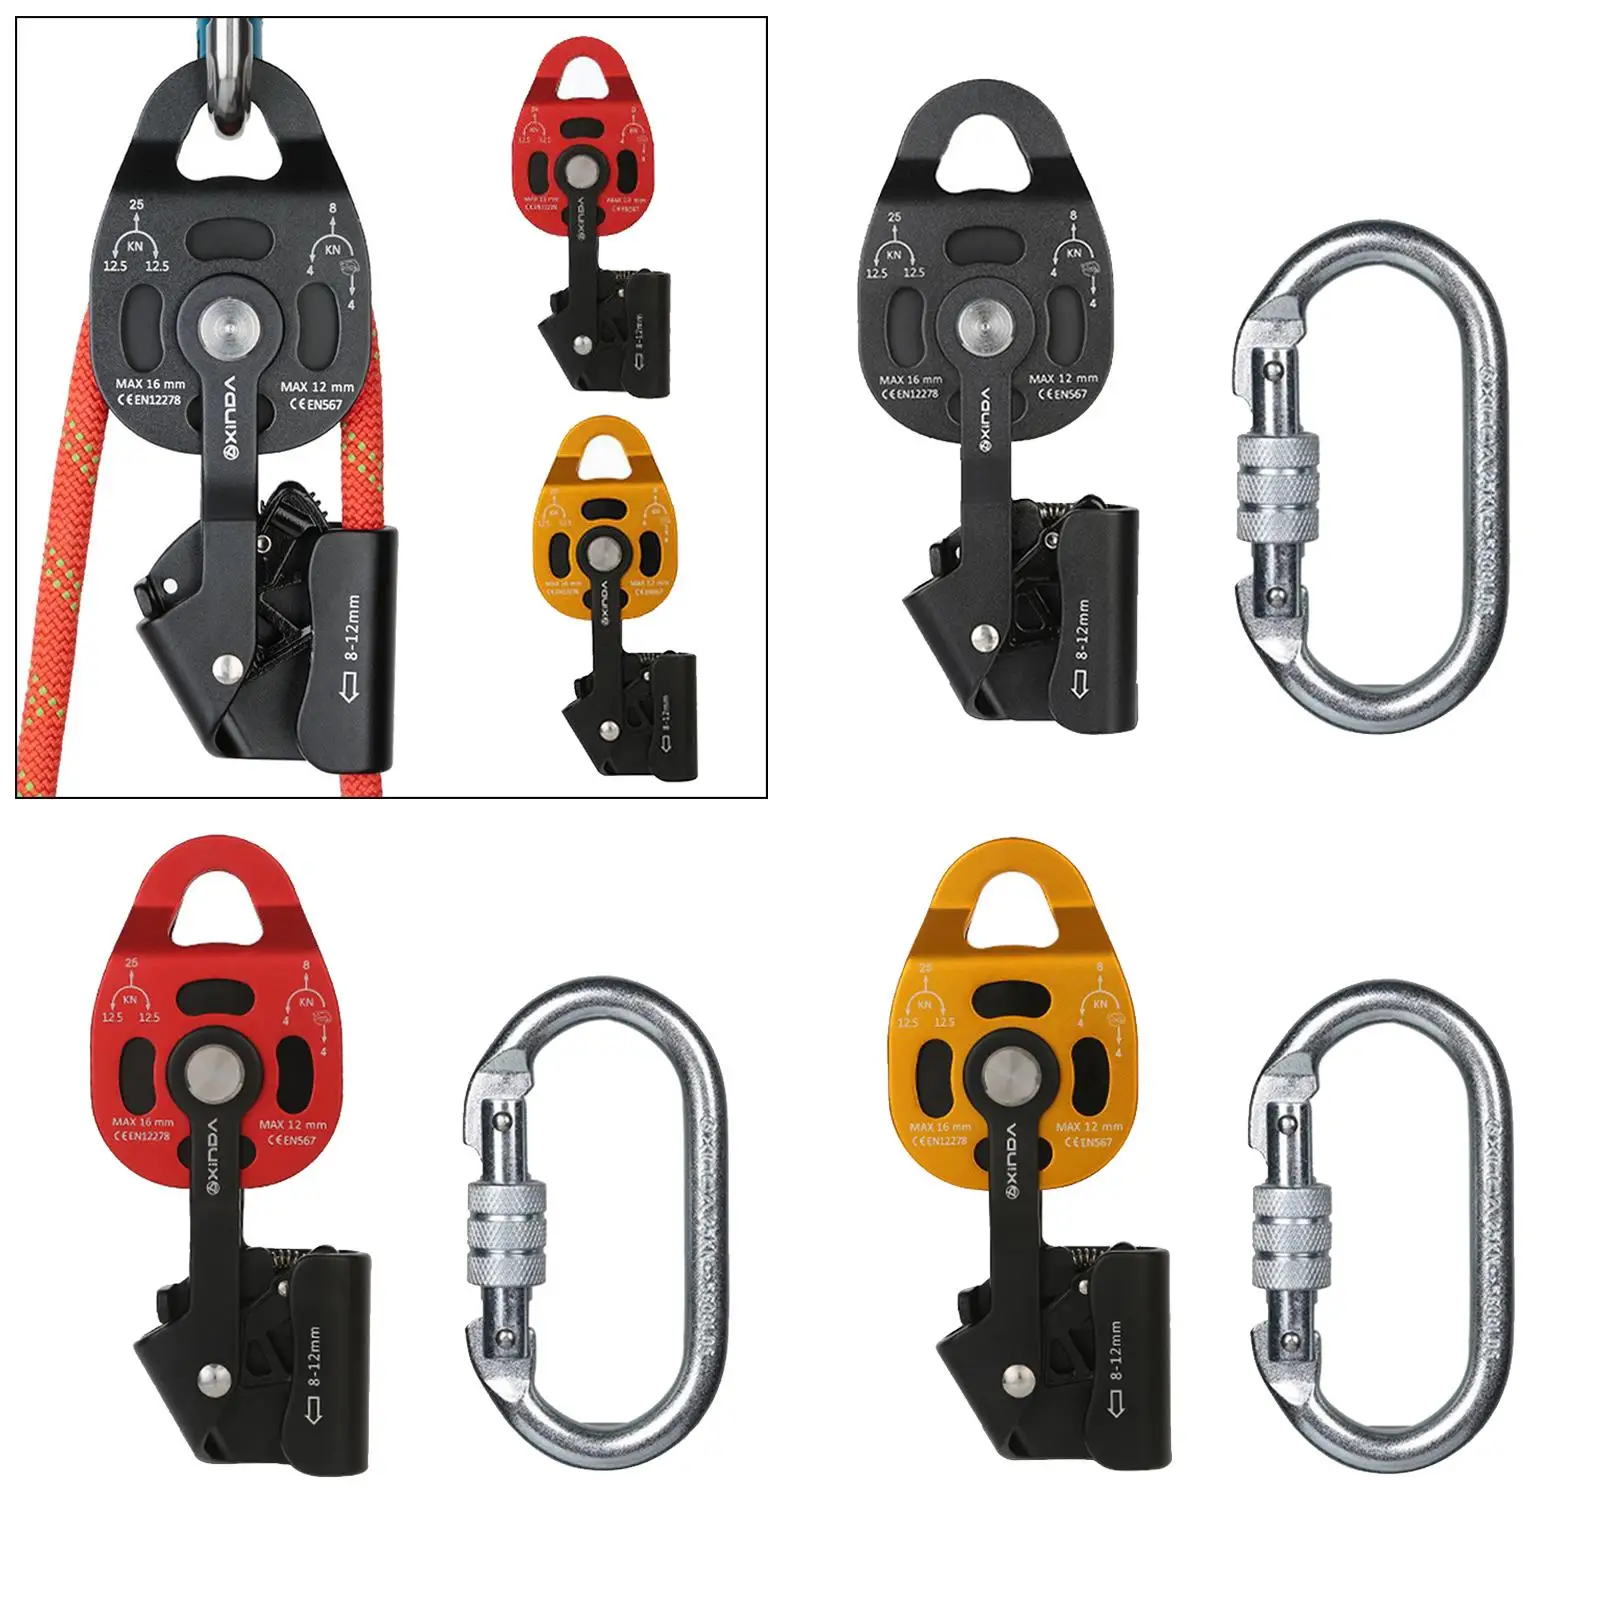 25KN Hauling Pulley Lifting Prusik Pulley Block Heavy-Duty Tackle for 12mm Rock Climbing Rope with Carabiner Clasp